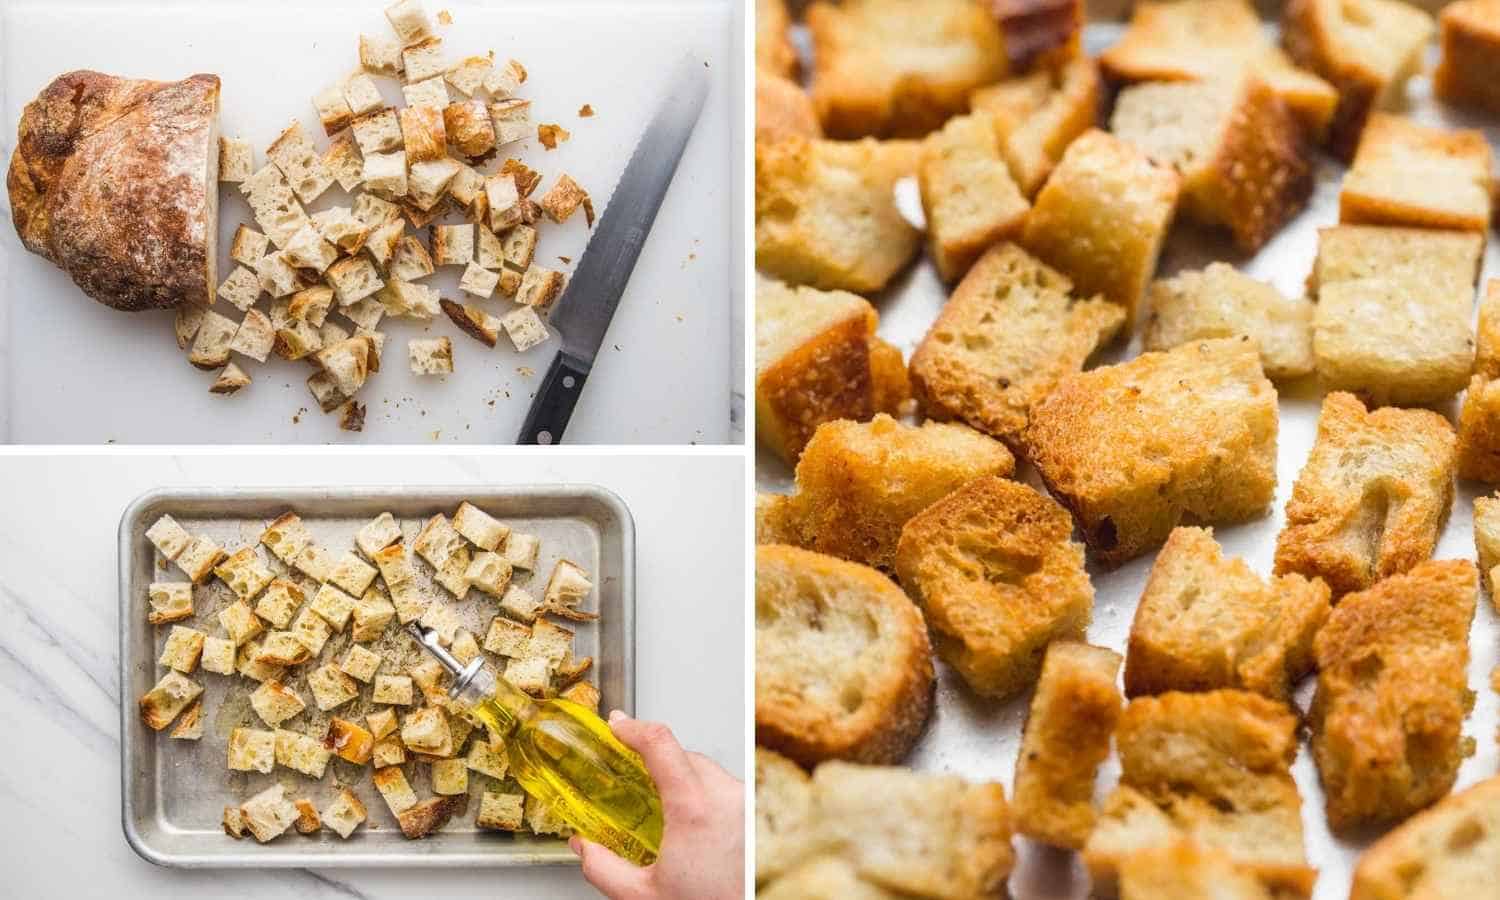 Collage of three images showing how to cut up a loaf of bread, drizzle oil and season it, then bake the croutons.